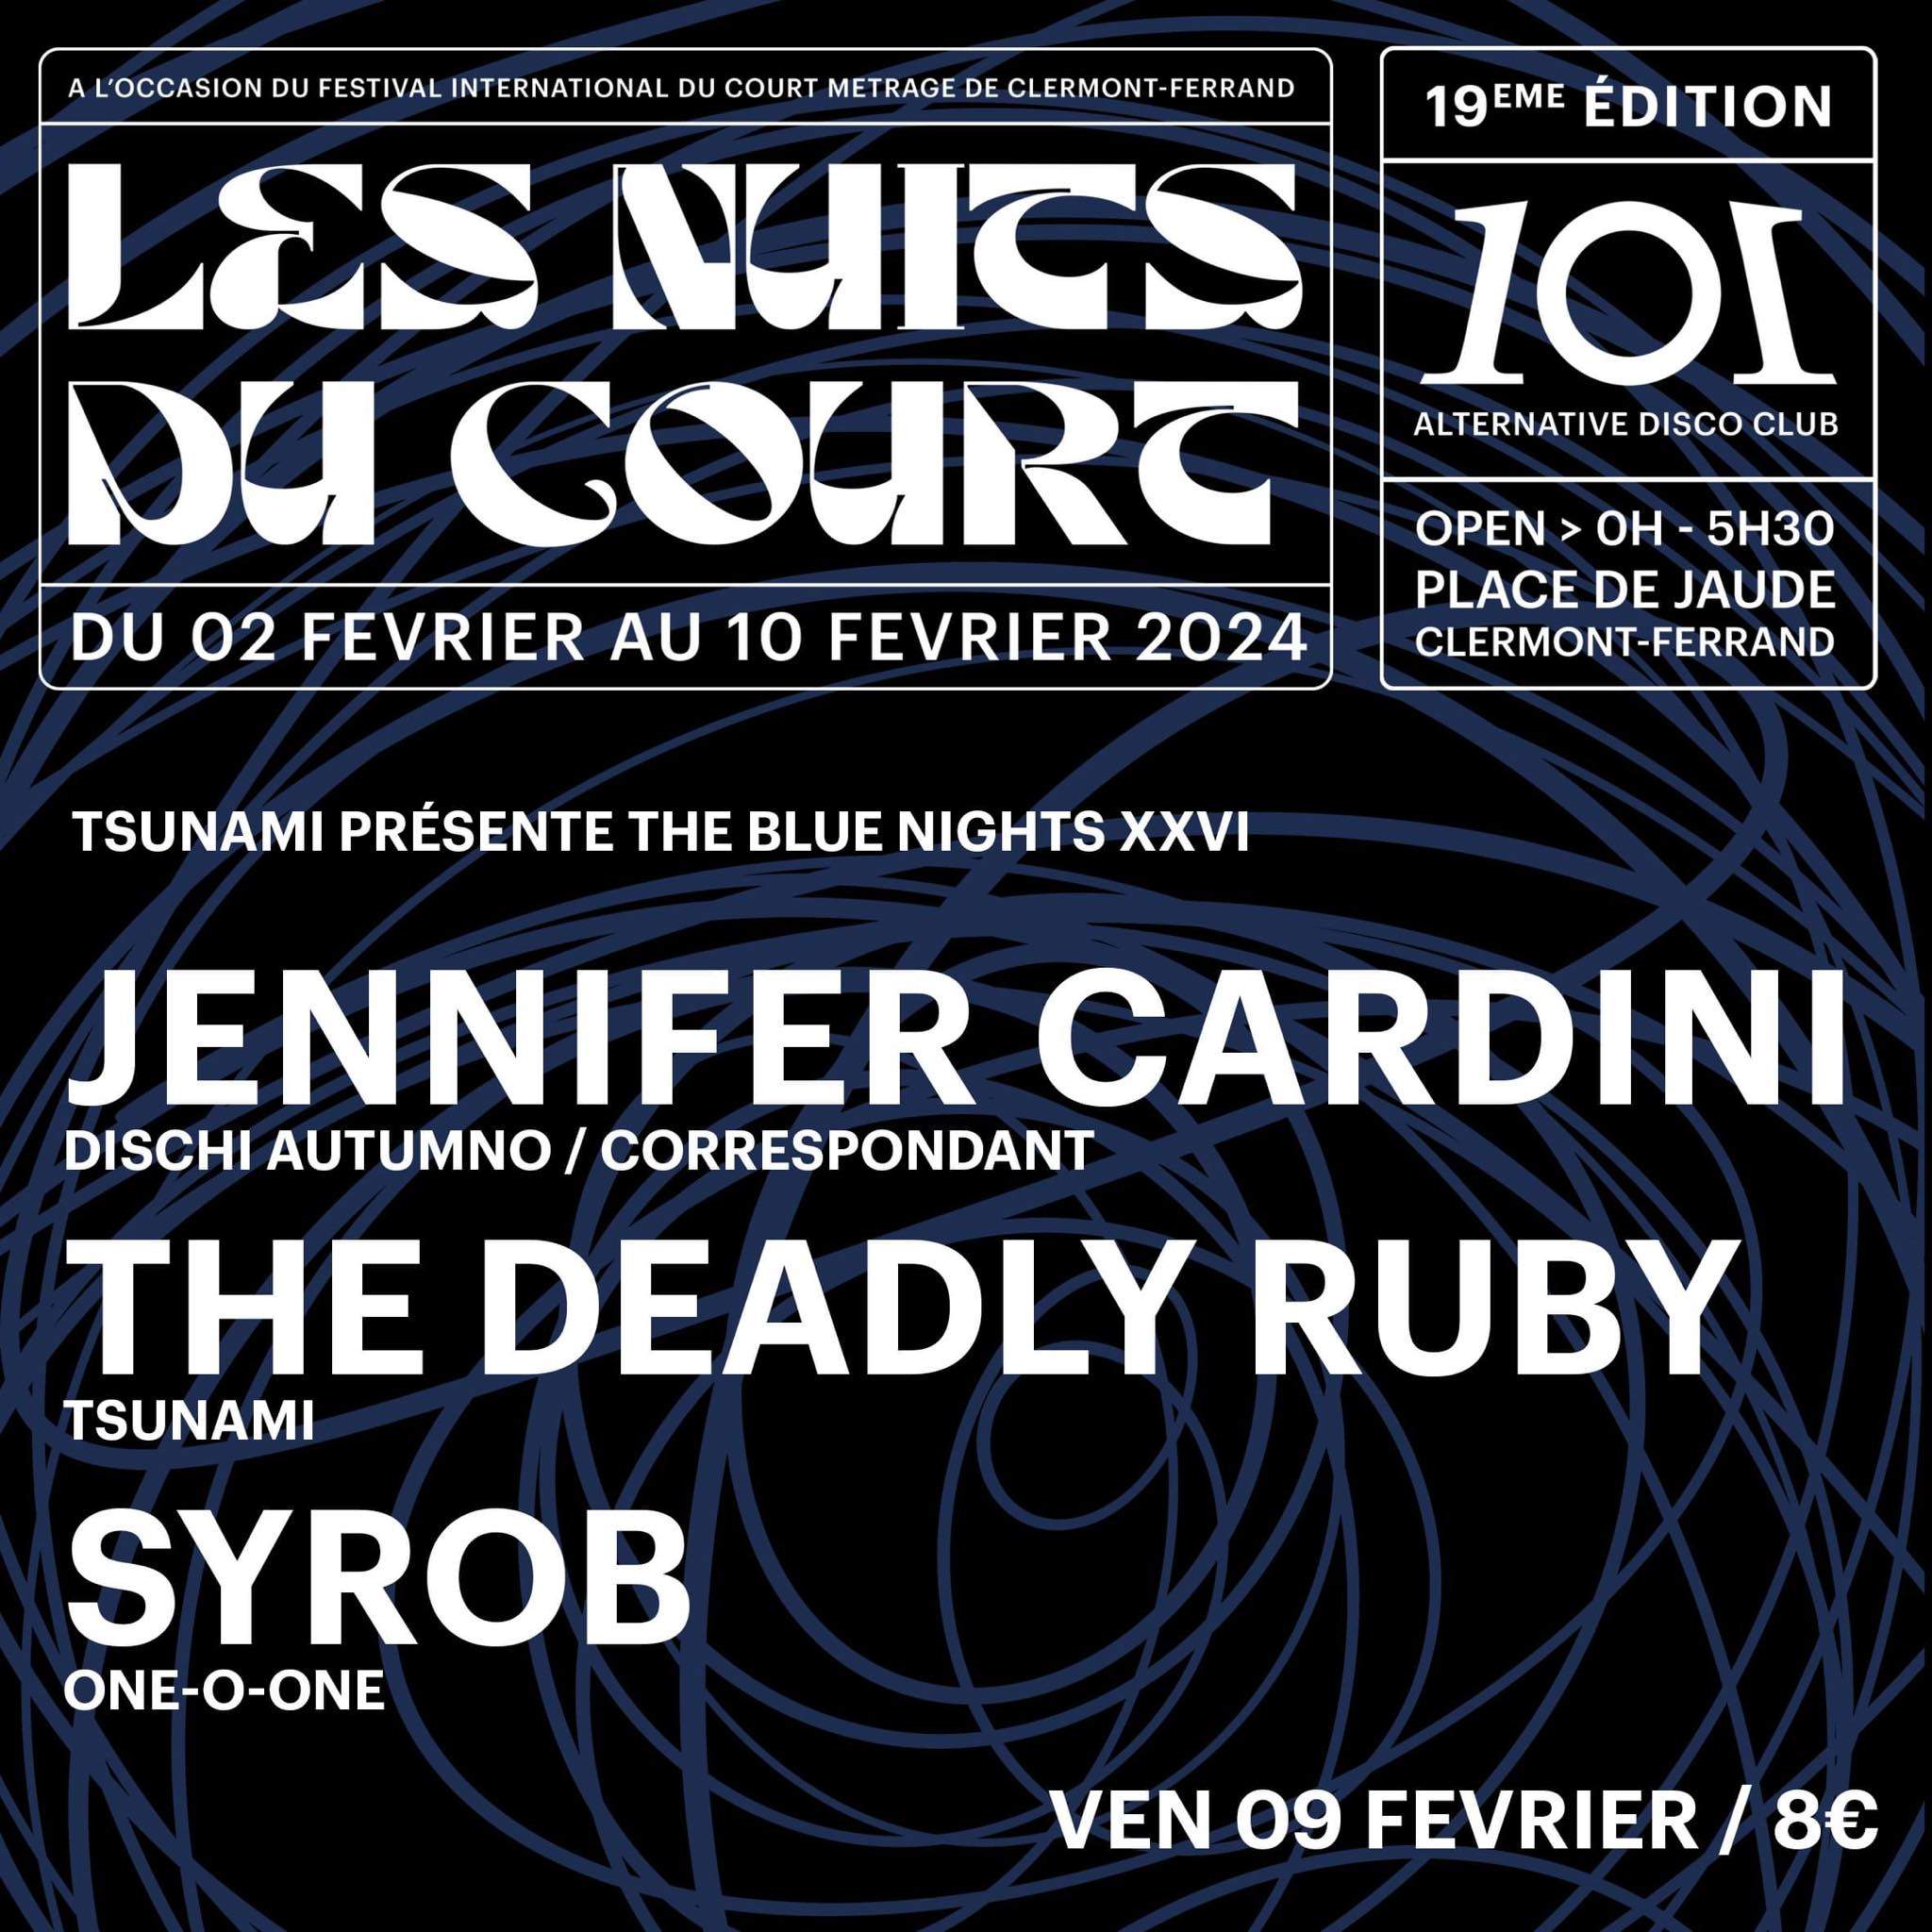 The Blue Nights XXVI x Les Nuits du Court at 1O1 club - フライヤー表